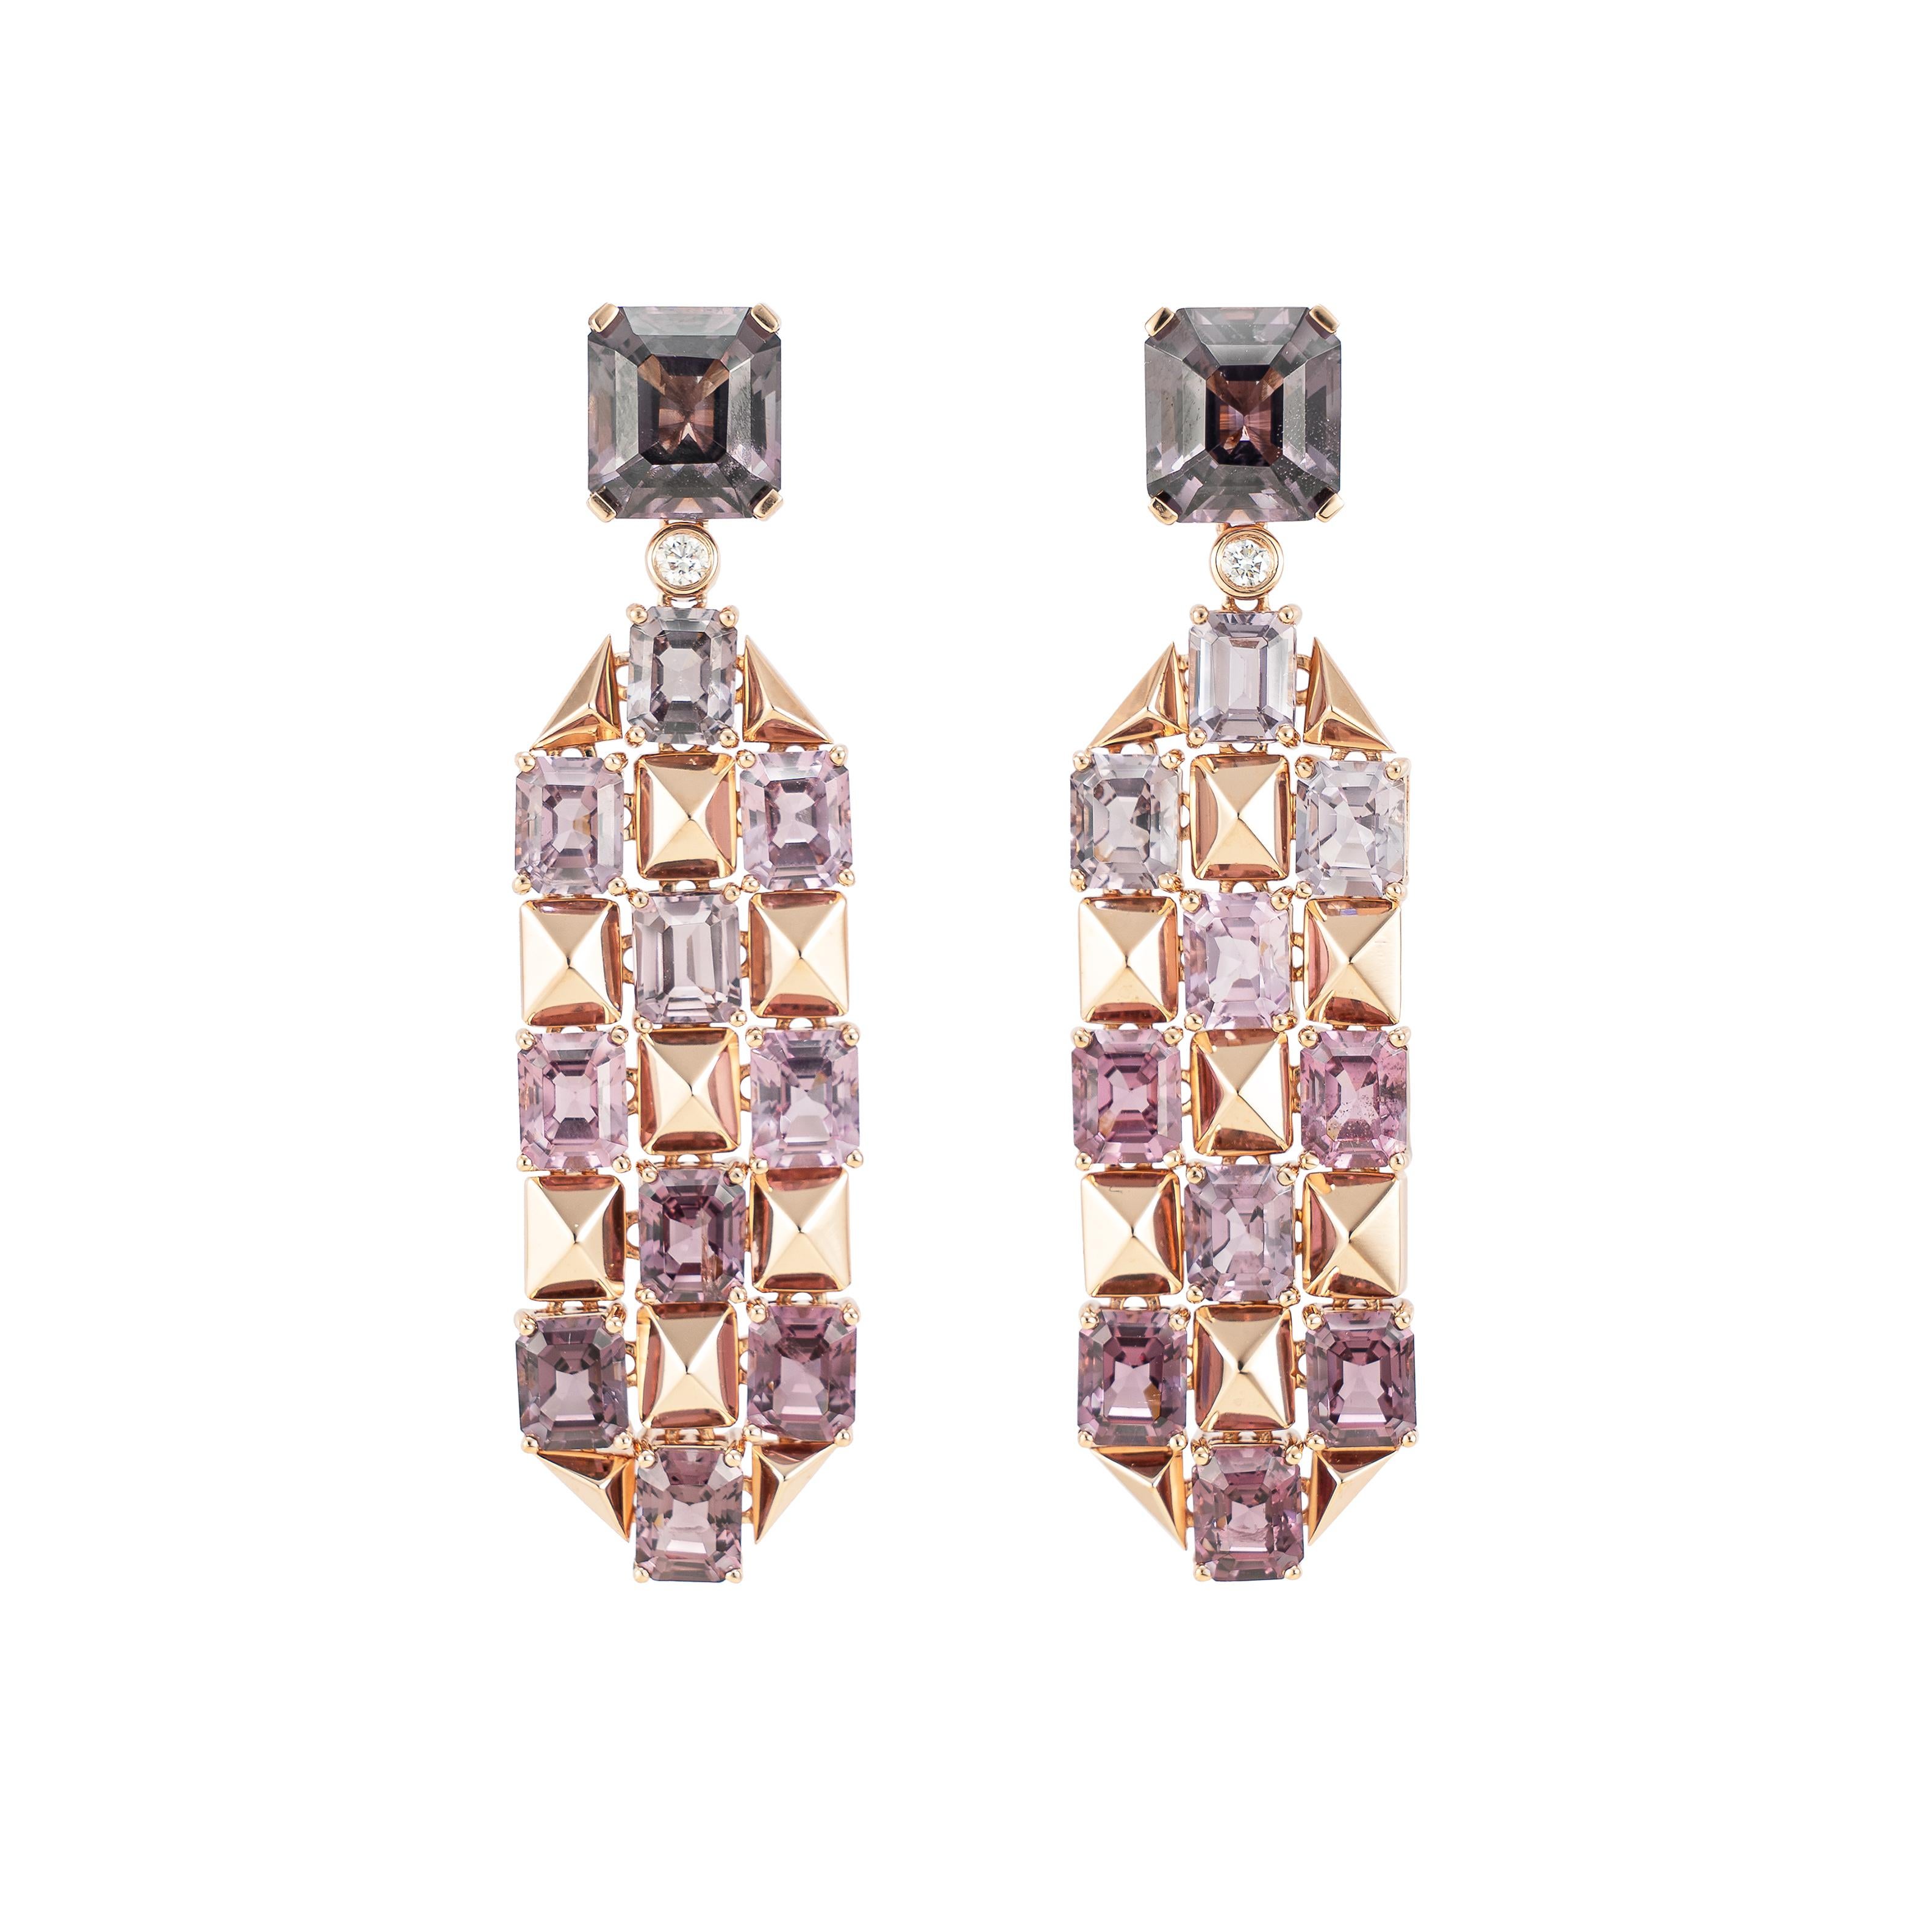 Light and easy to wear these earrings showcase multicolor fancy cut spinels accented with  diamonds. These earrings are dainty yet have a great pop of color from the vibrant gems.

Multicolor Ombre Spinel Earrings with Diamond in 18 Karat Rose